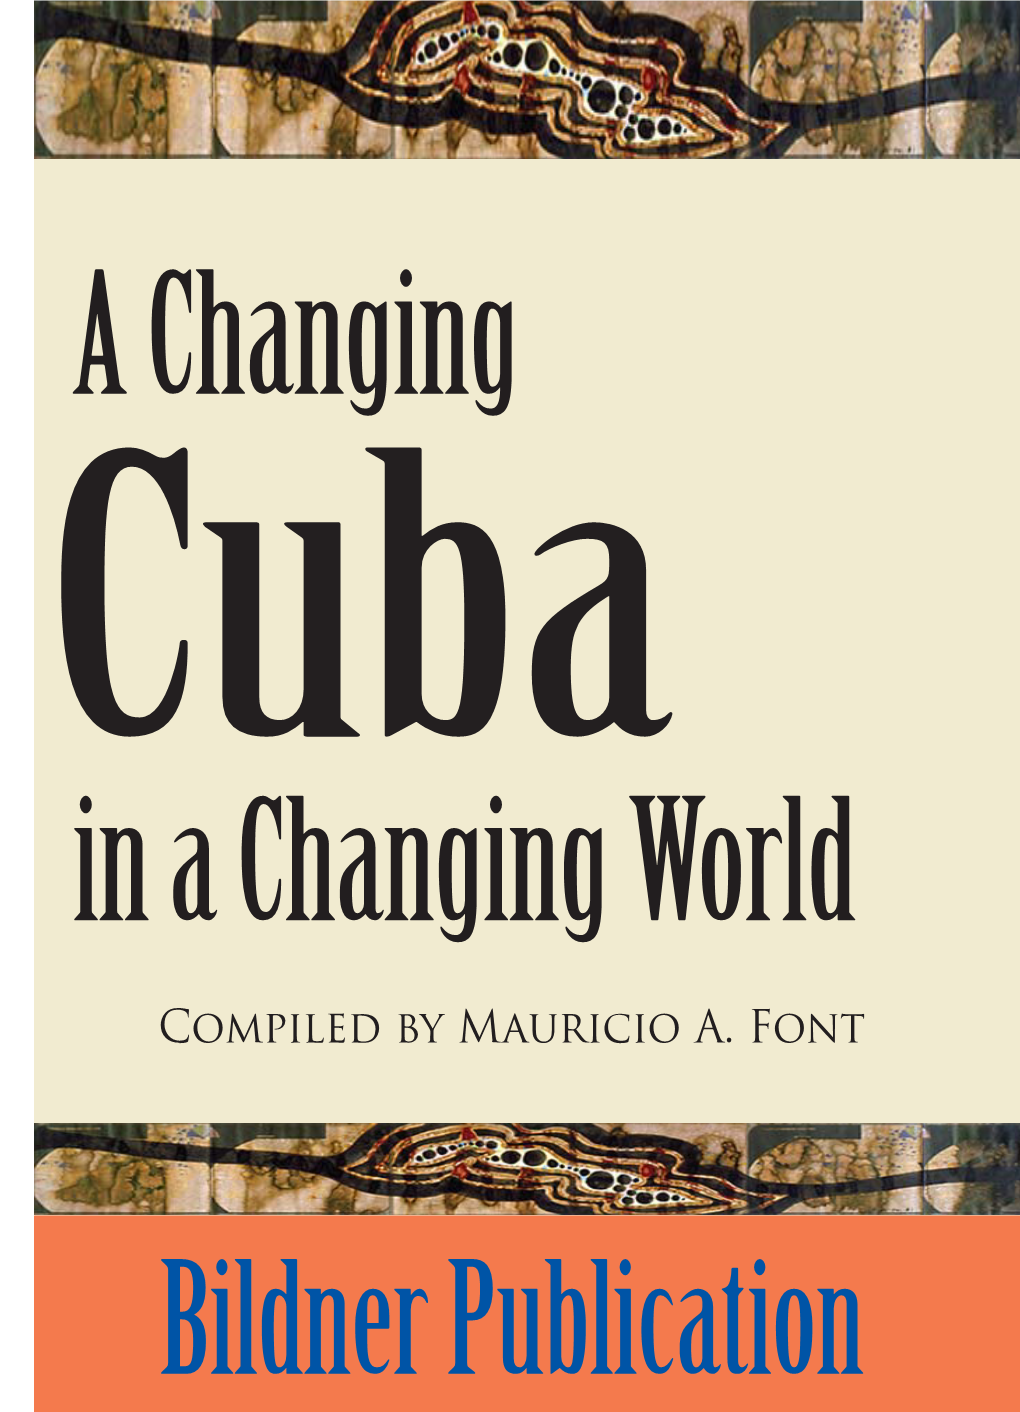 Compiled by Mauricio A. Font Bildner Publication